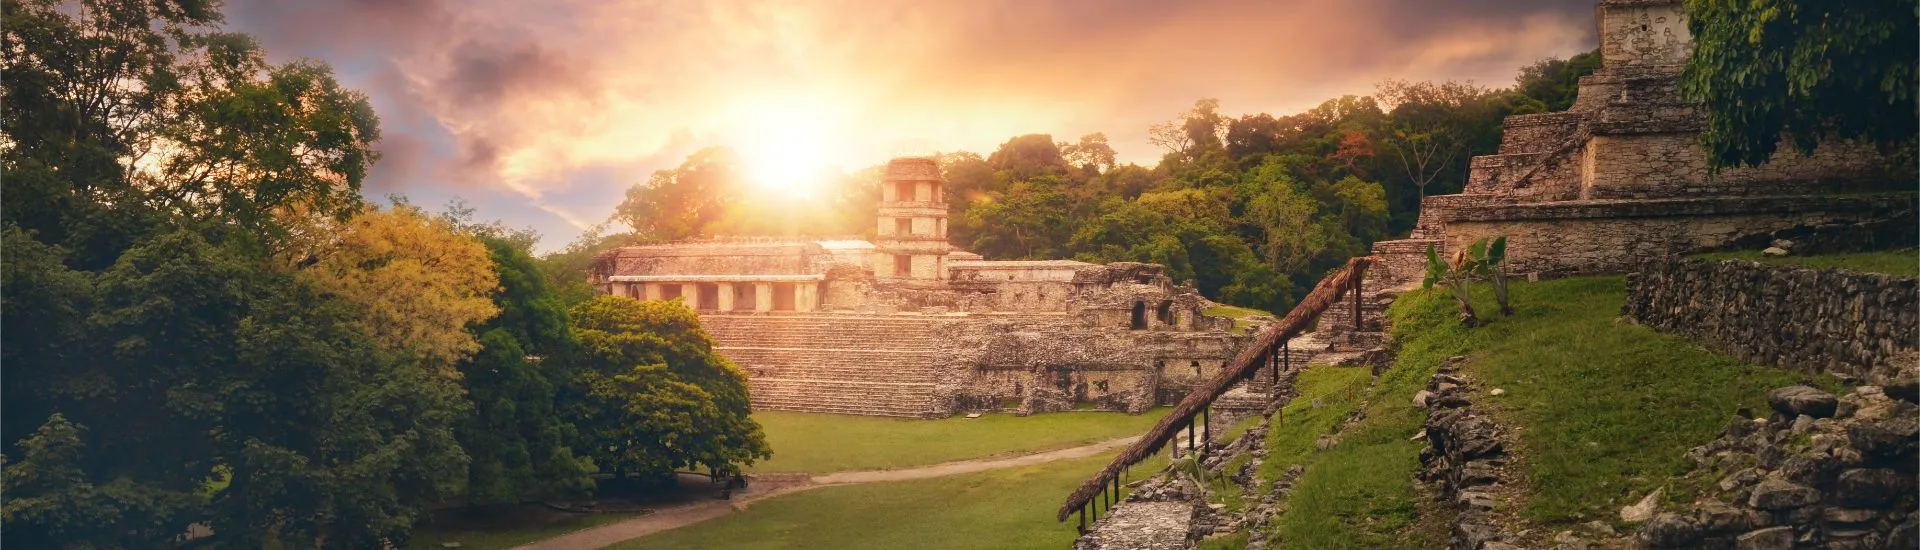 Sunset in Palenque Archaeological Zone in Chiapas, Mexico